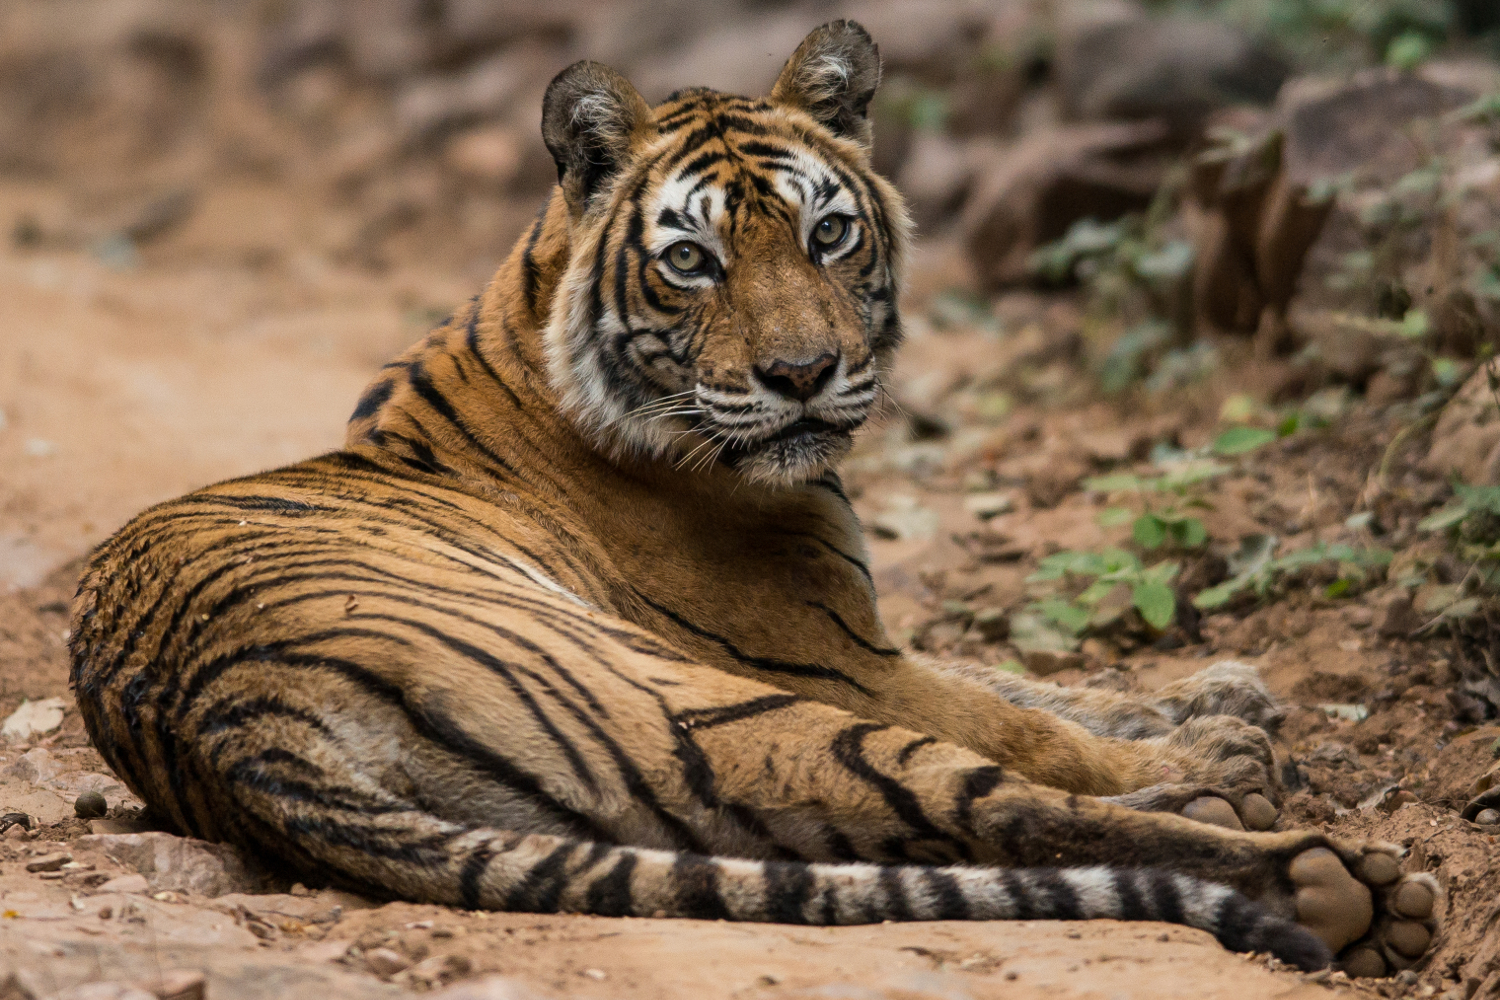 Royal Bengal tiger in repose, Rajasthan. © Christopher Kray / CC BY 2.0